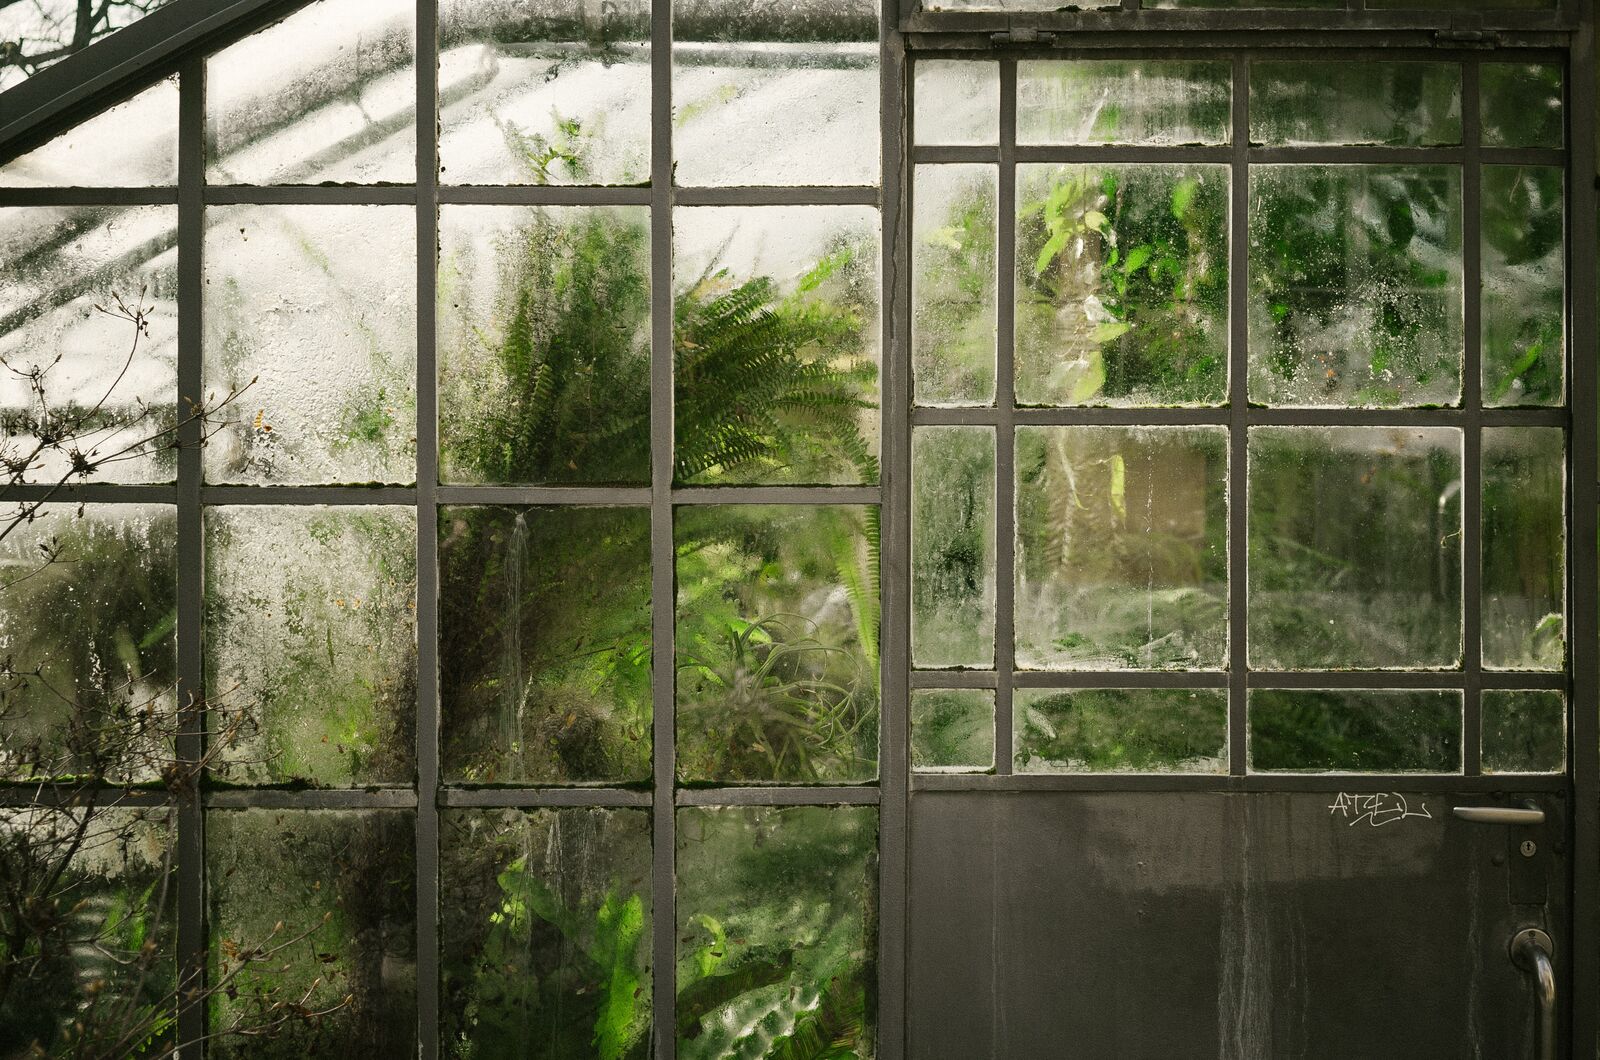 View through a glass wall into a greenhouse